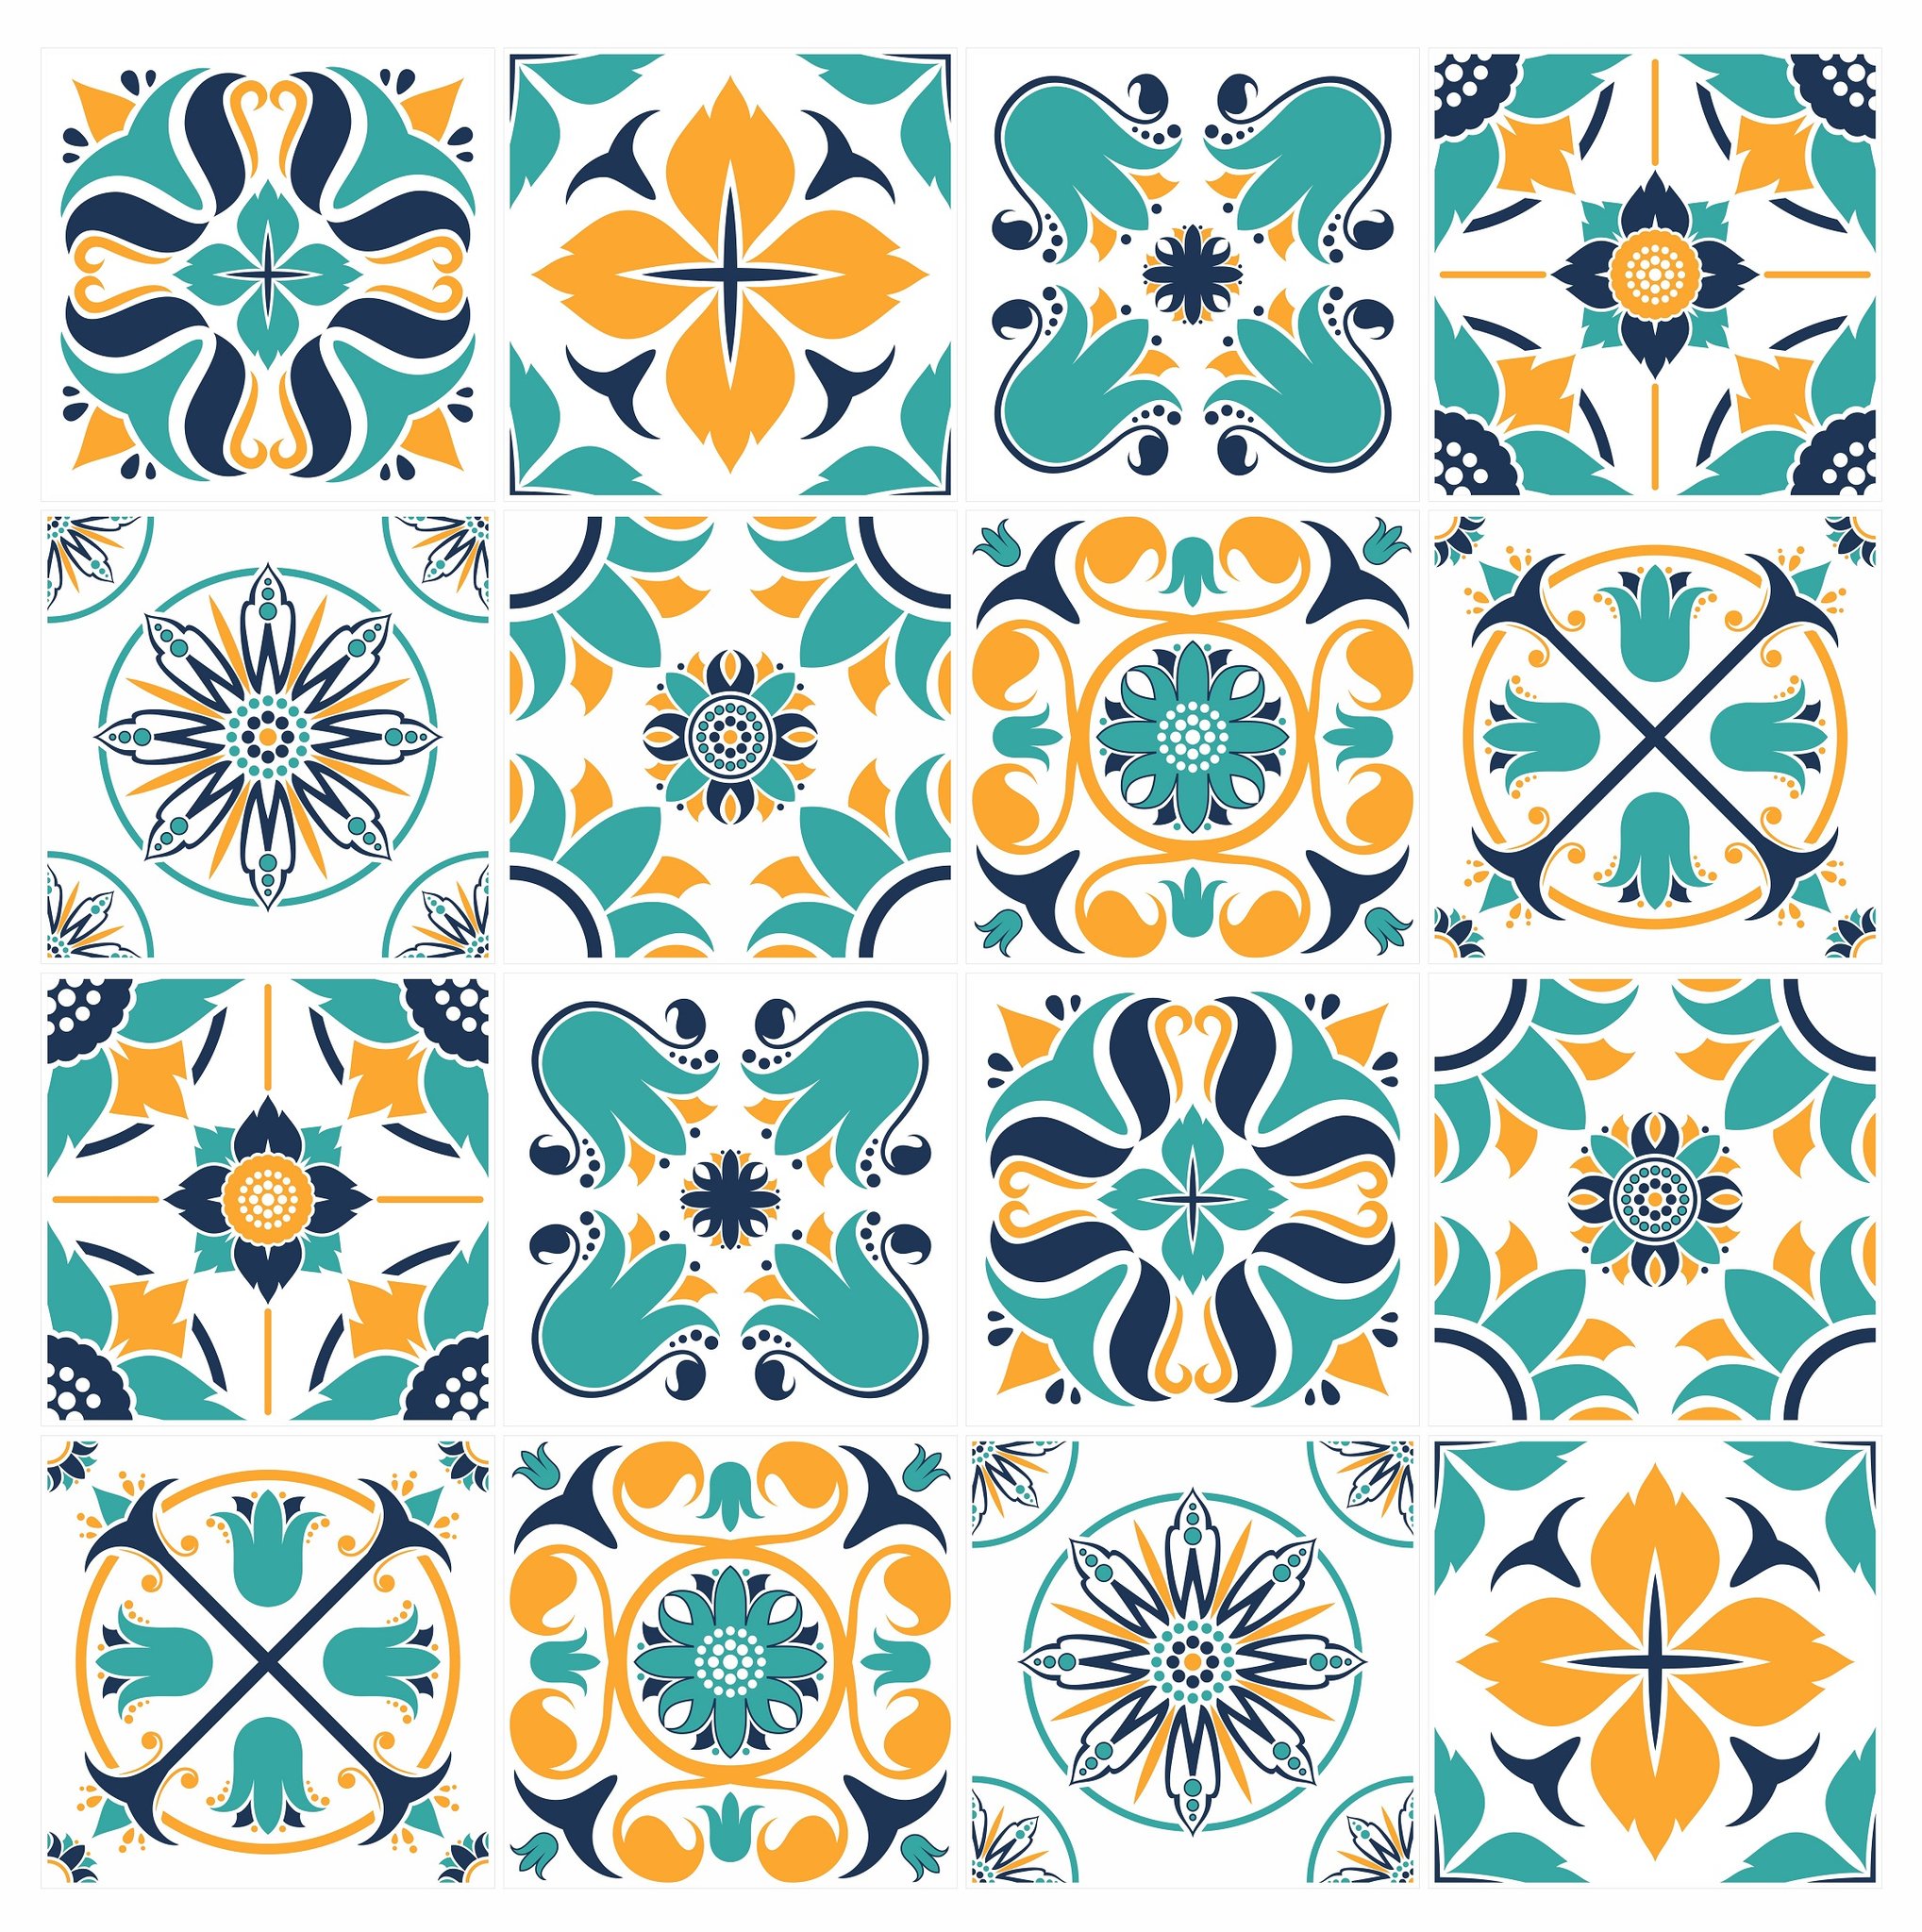 Vibrant mosaic tile stickers to brighten up your space